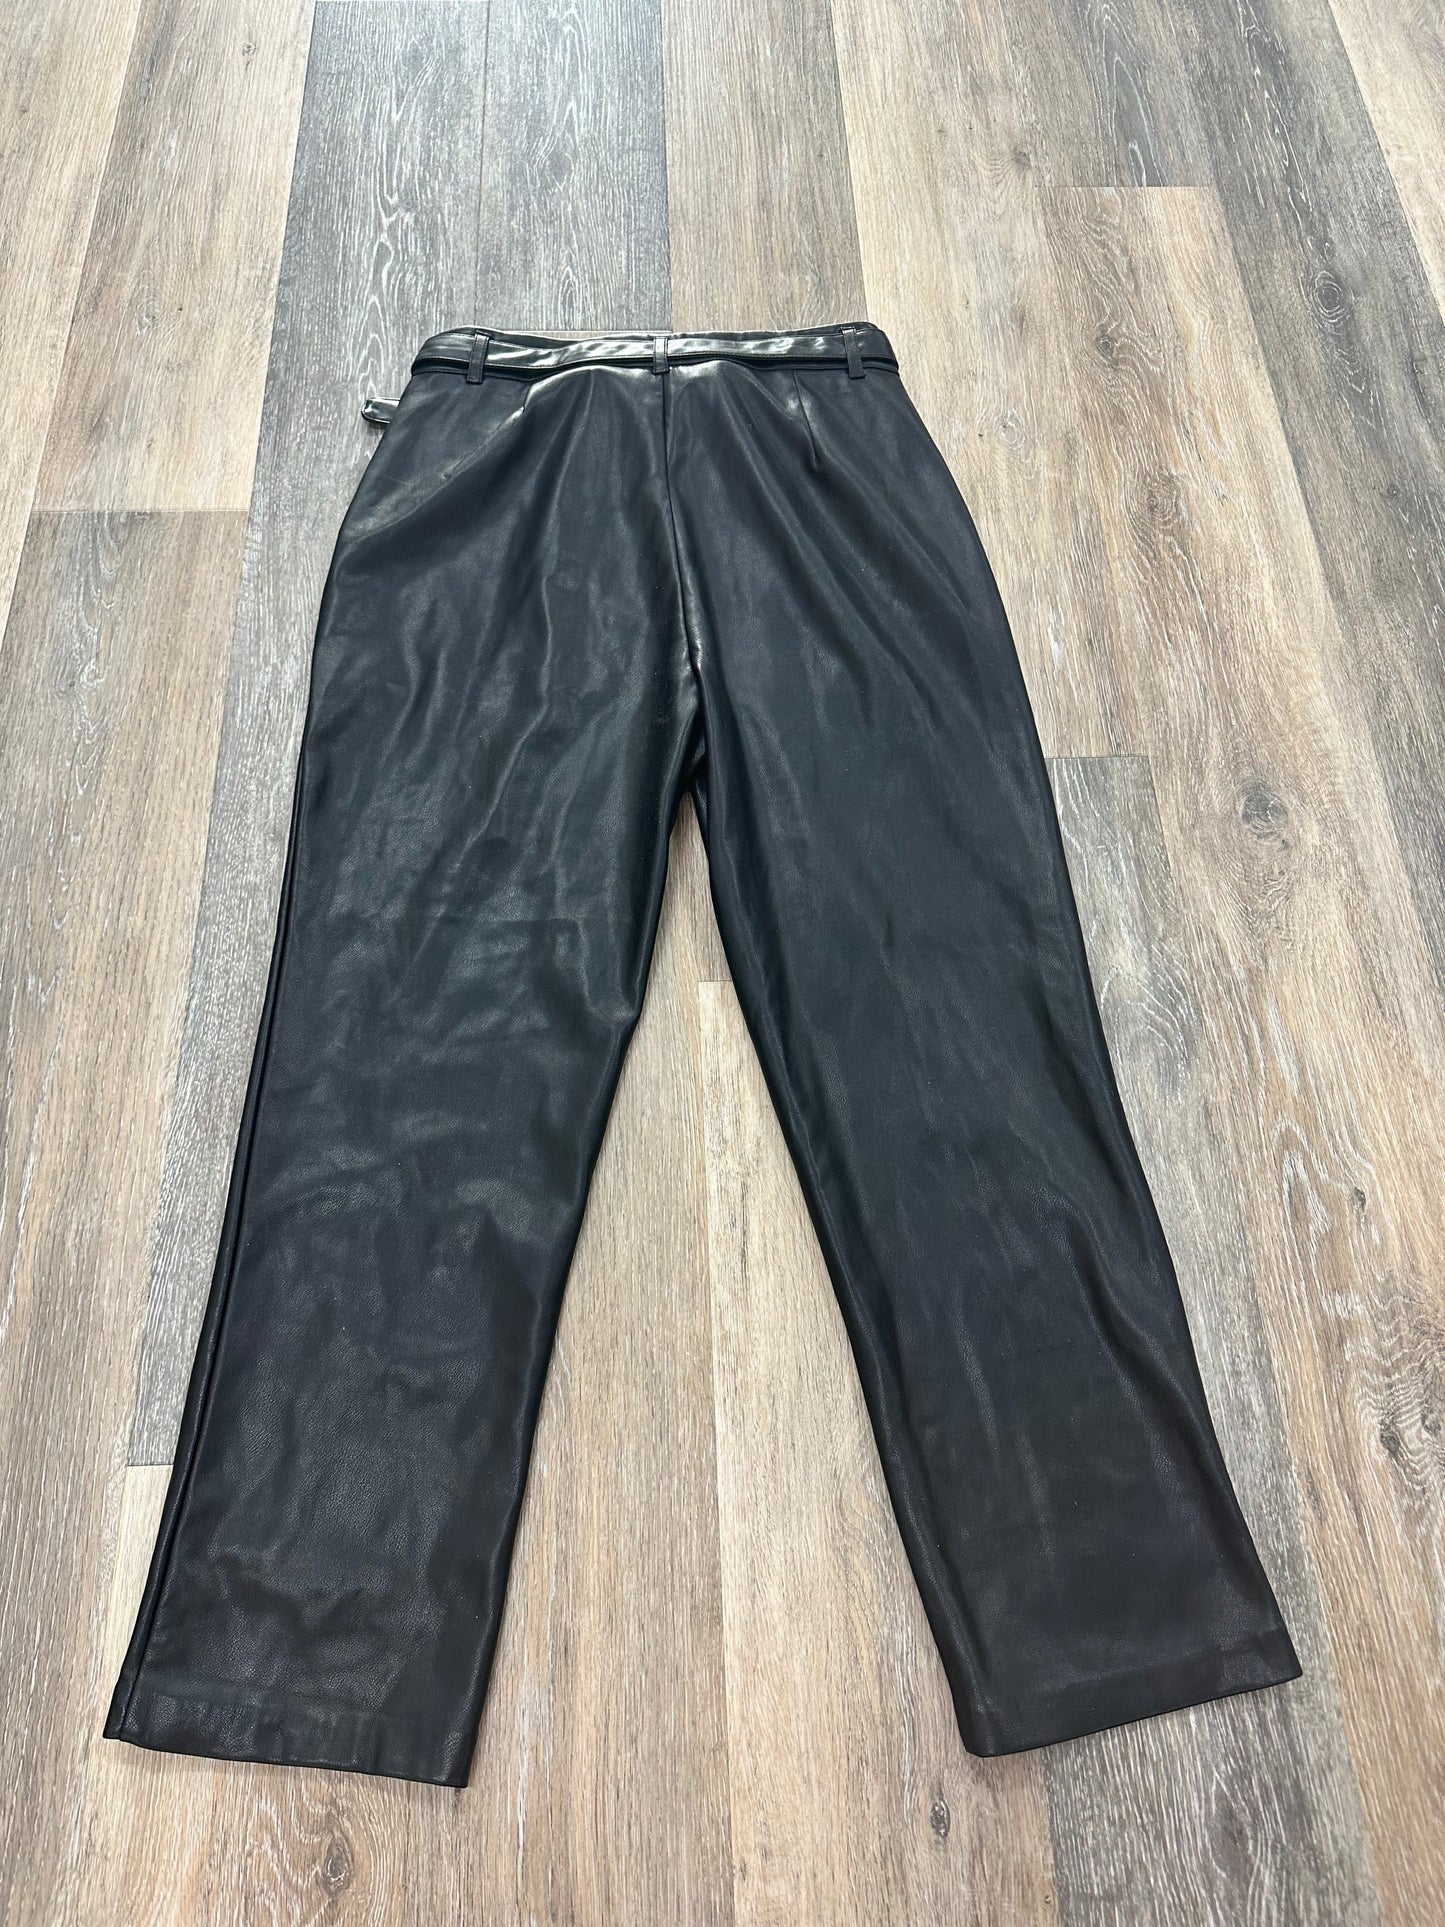 Pants Ankle By Marc New York  Size: 6